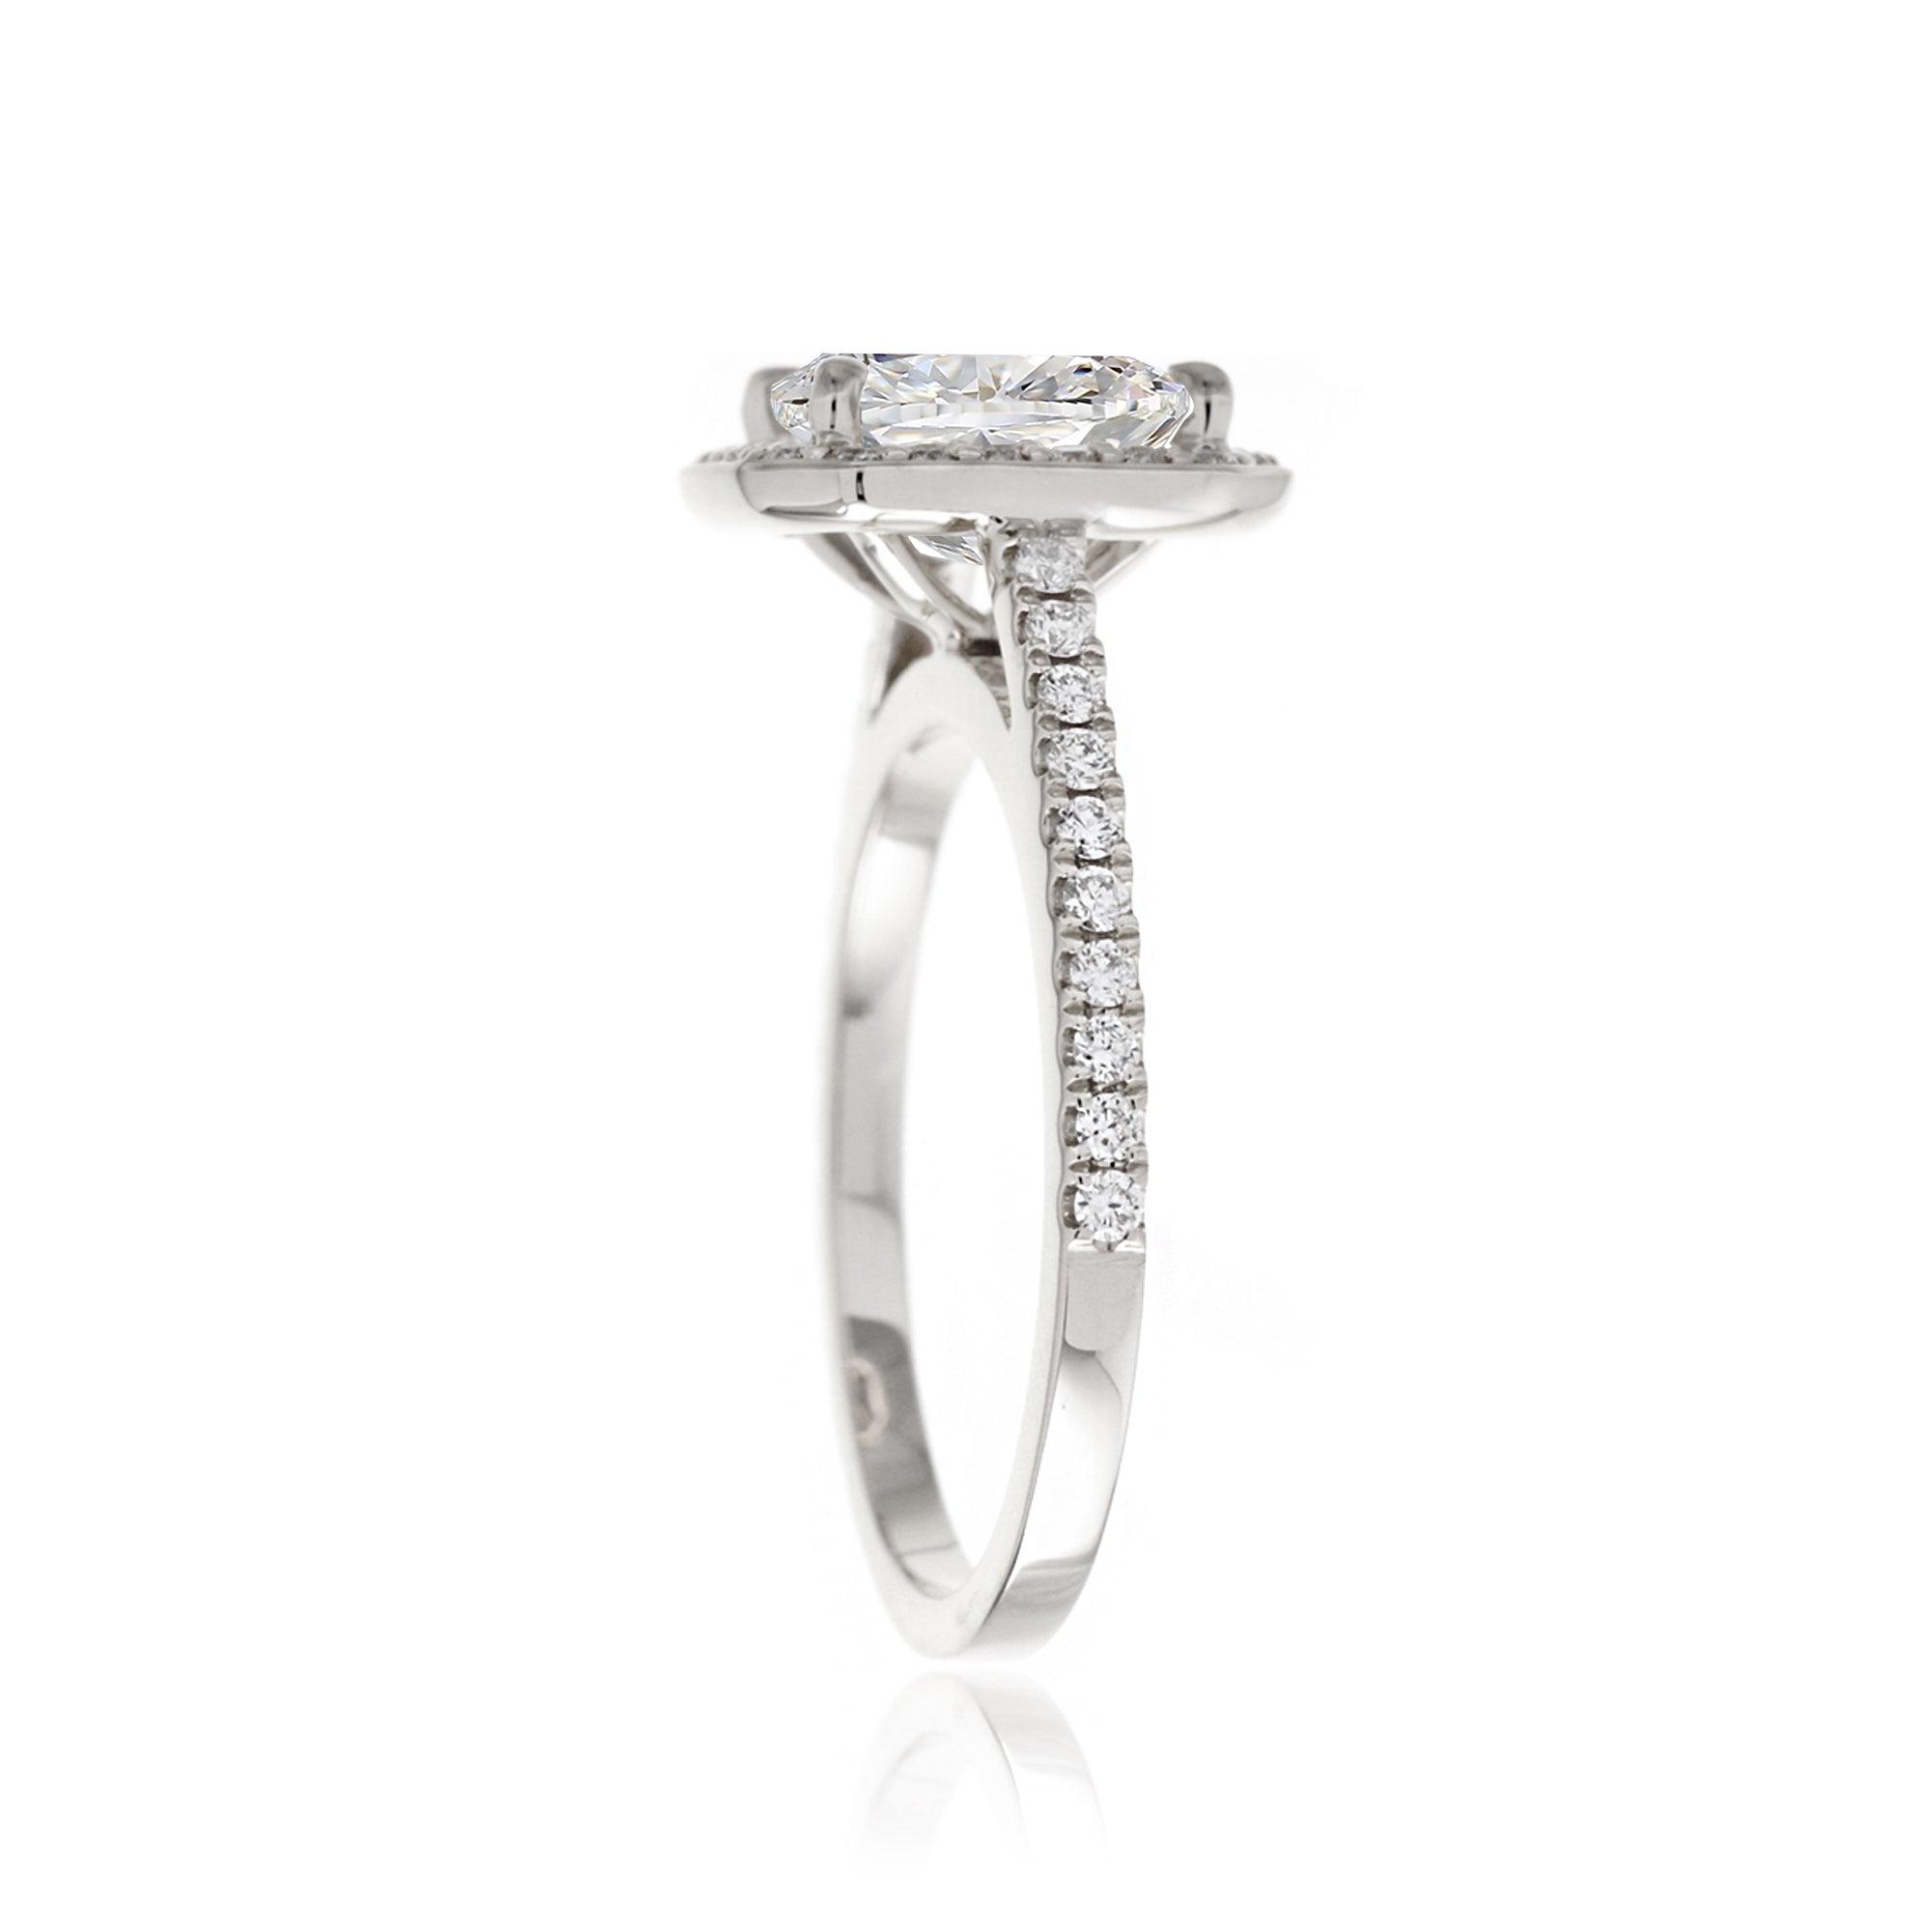 Cushion lab-grown diamond halo cathedral engagement ring - the Steffy white gold